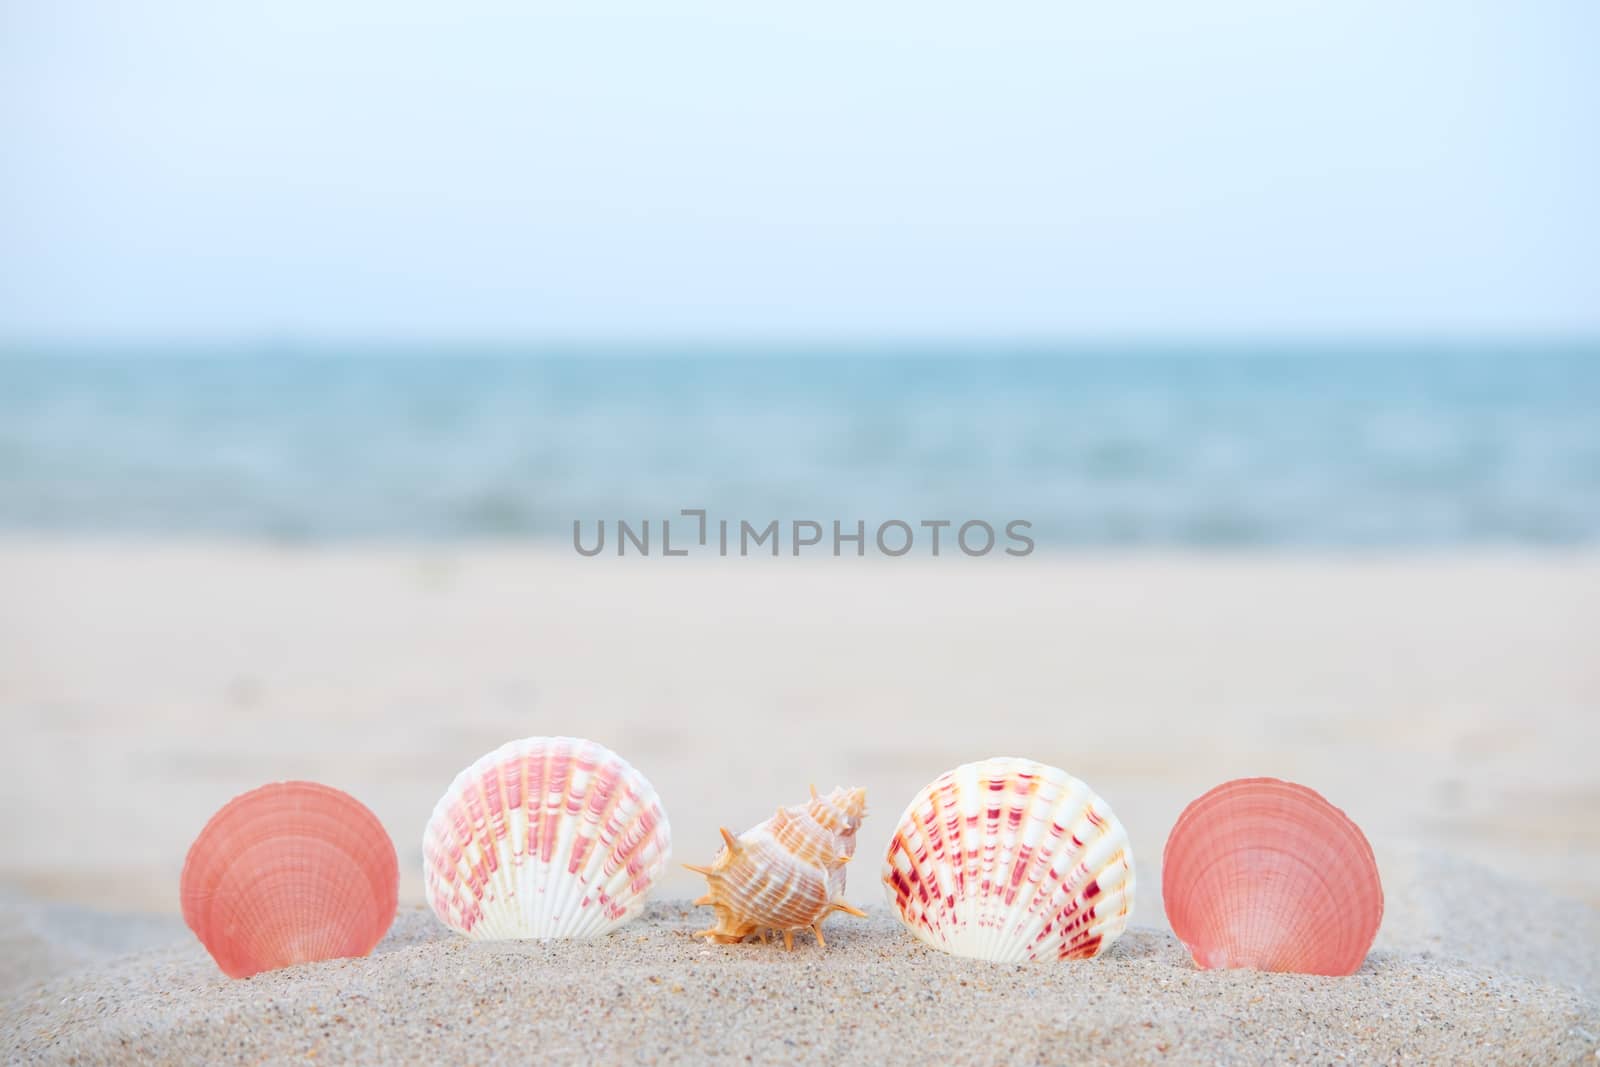 Shellfish on the sand with the turquoise sea background.